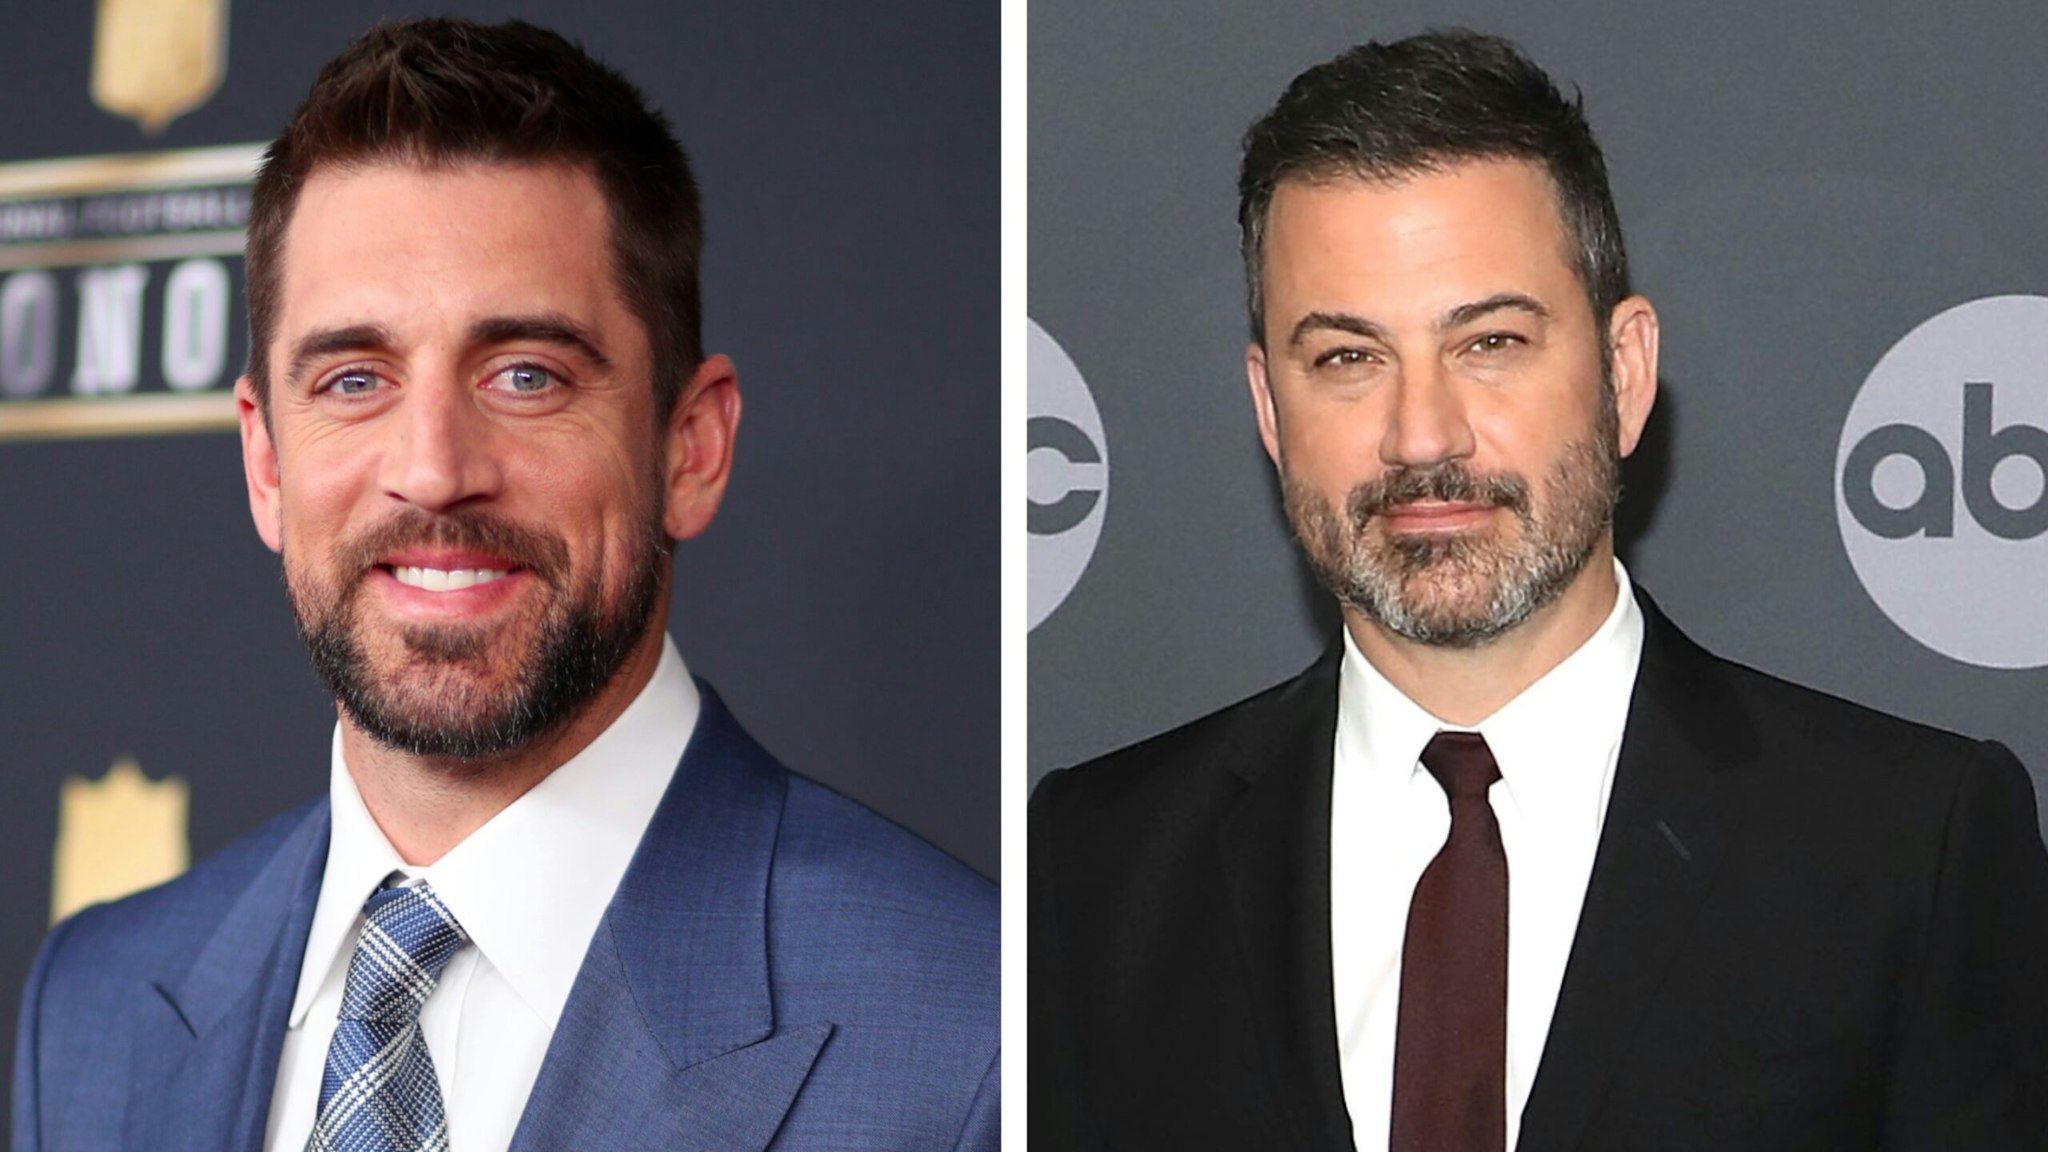 Rodgers and Kimmel